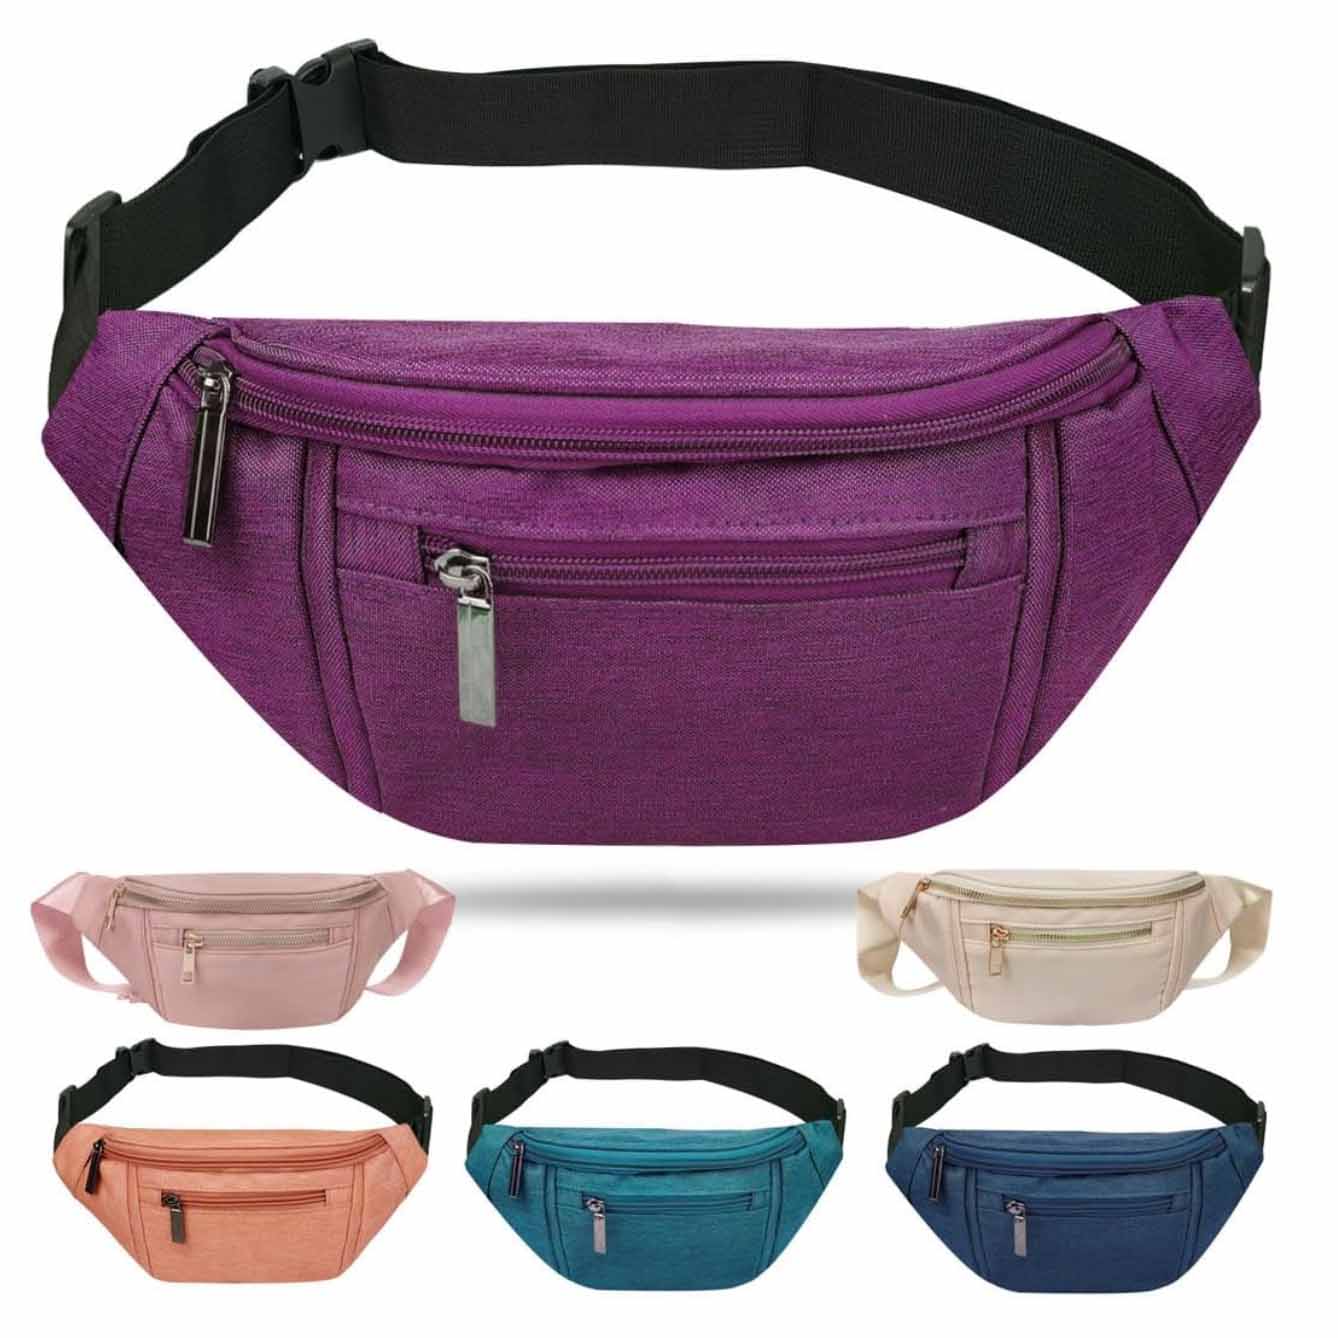 6 fanny packs in different colors